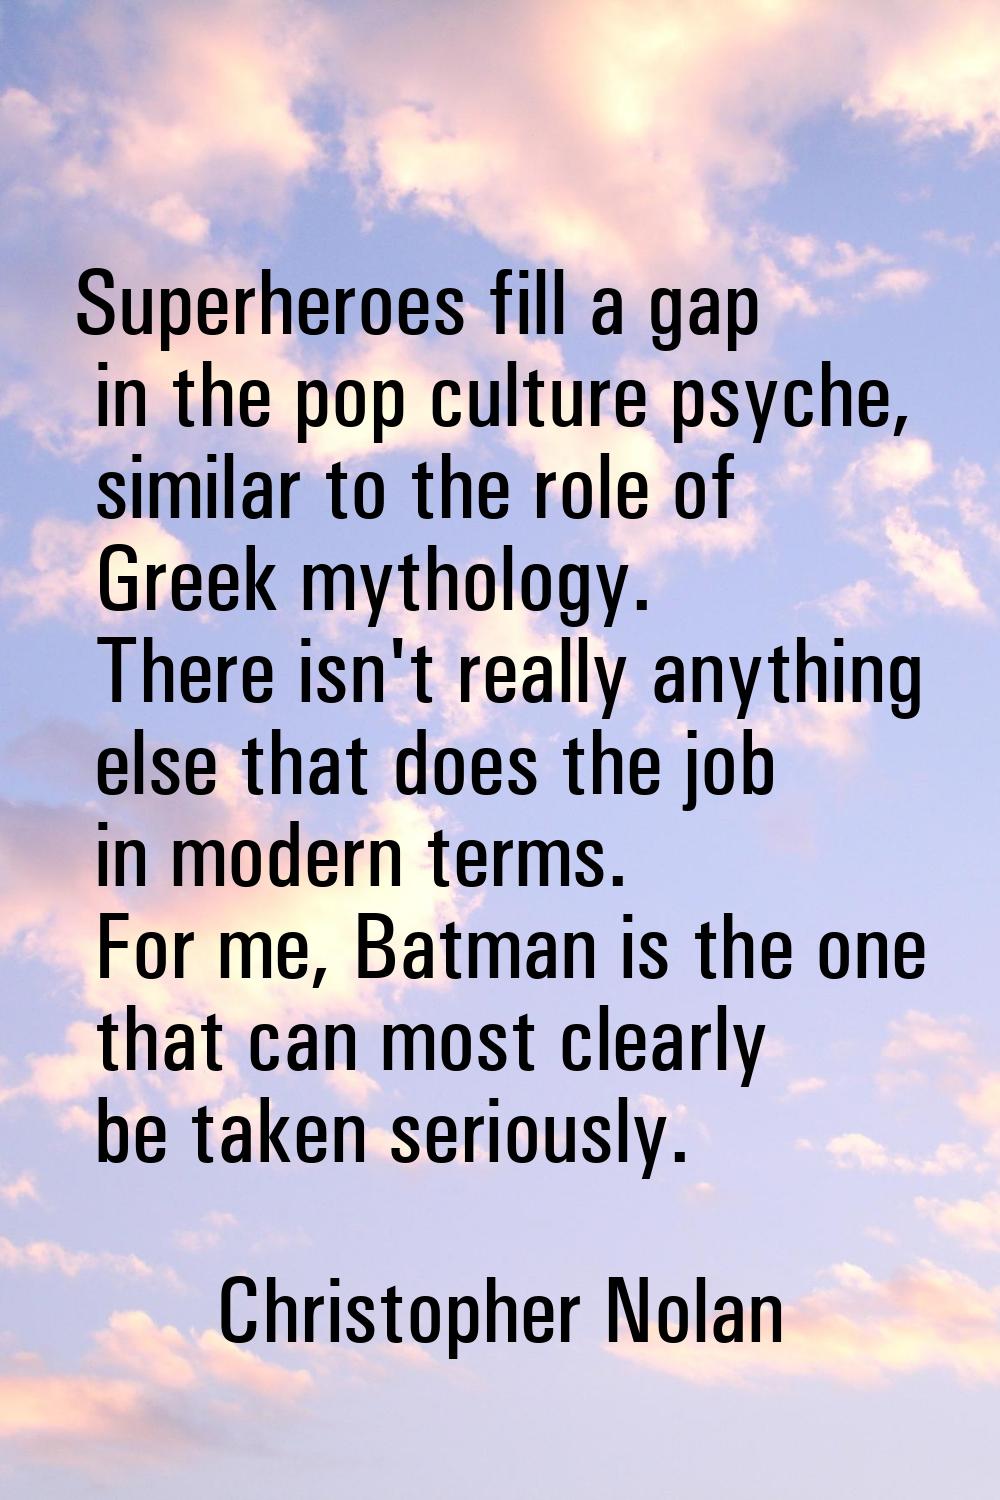 Superheroes fill a gap in the pop culture psyche, similar to the role of Greek mythology. There isn